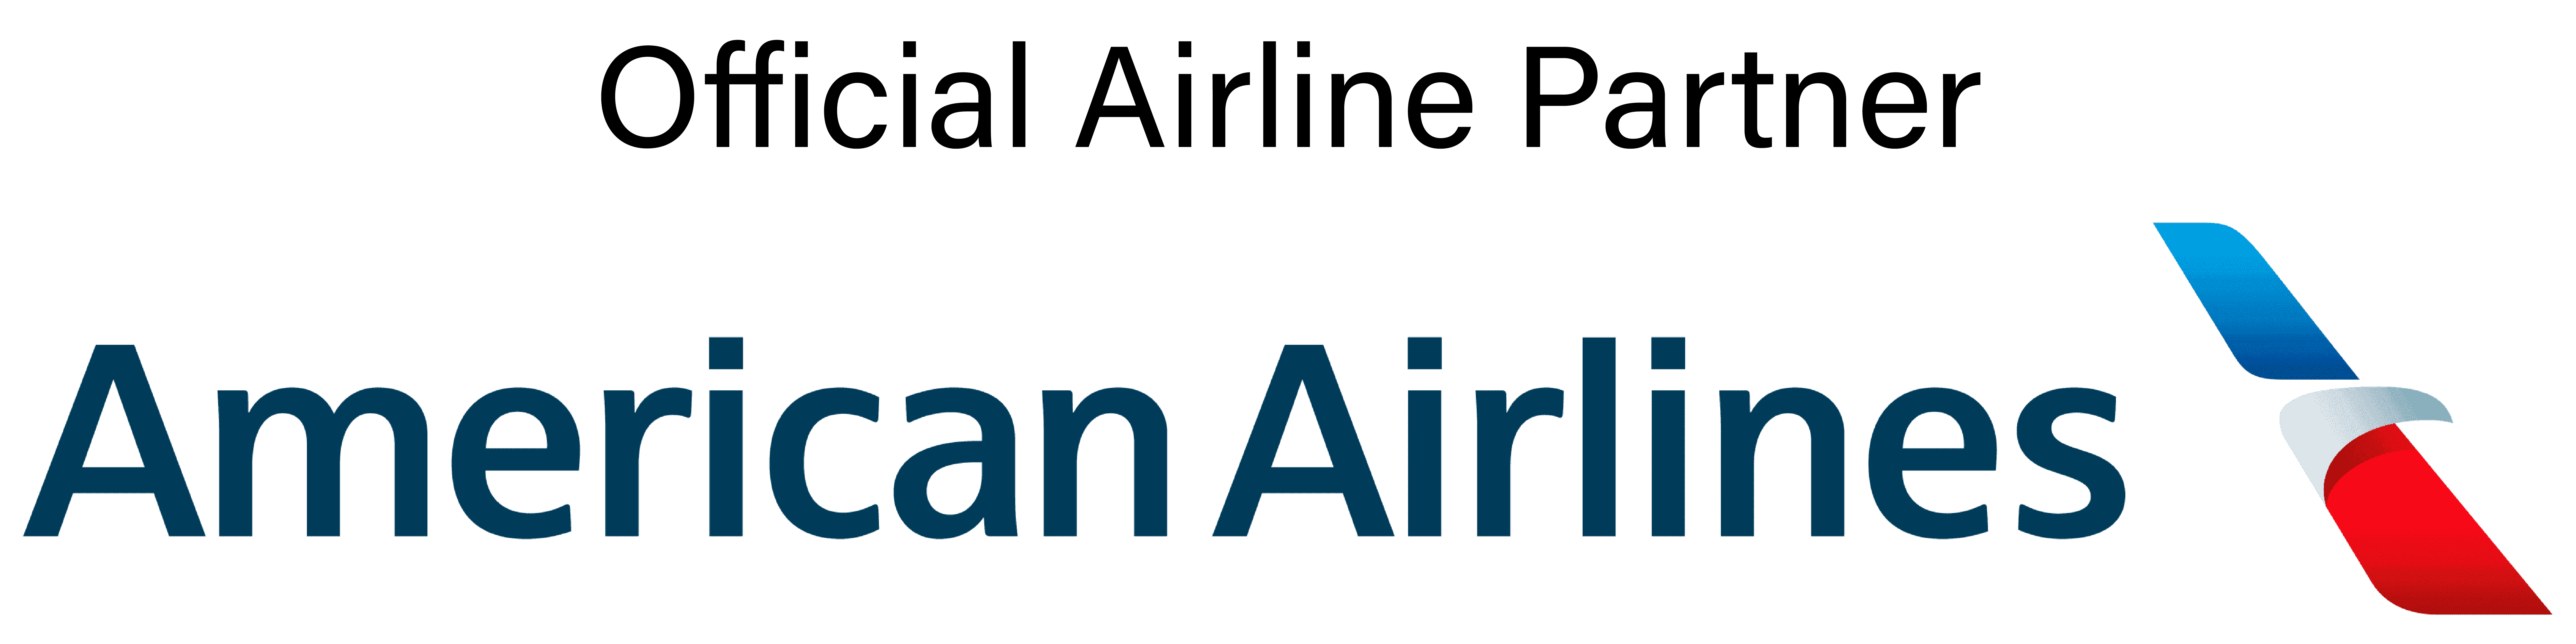 Official Airline Partner - American Airlines